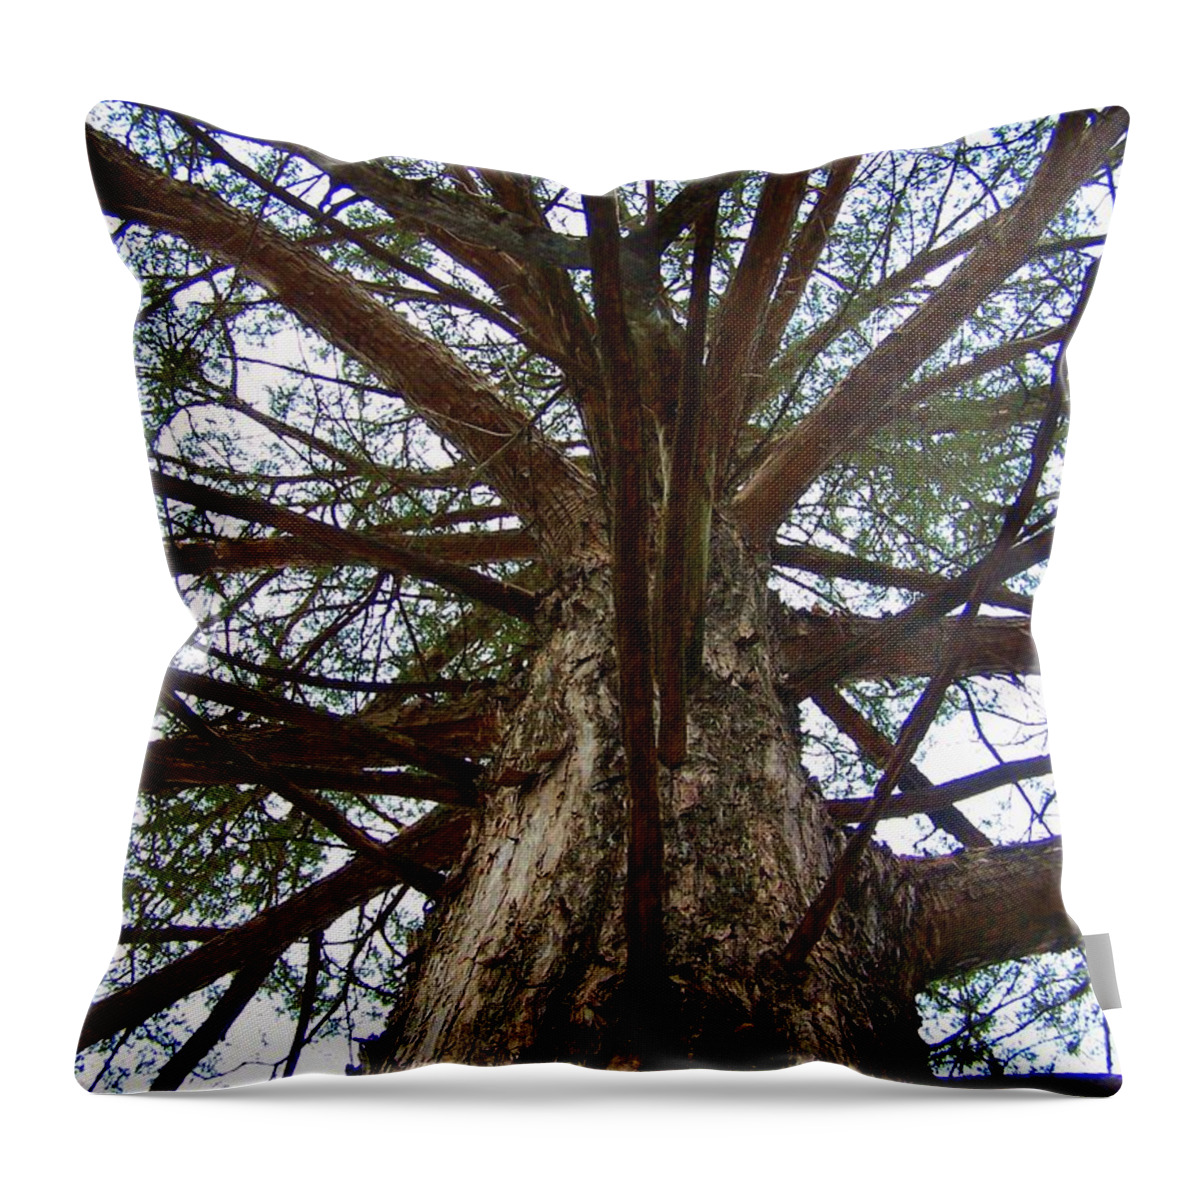 Life Throw Pillow featuring the photograph LIve Spokes by Nadine Rippelmeyer